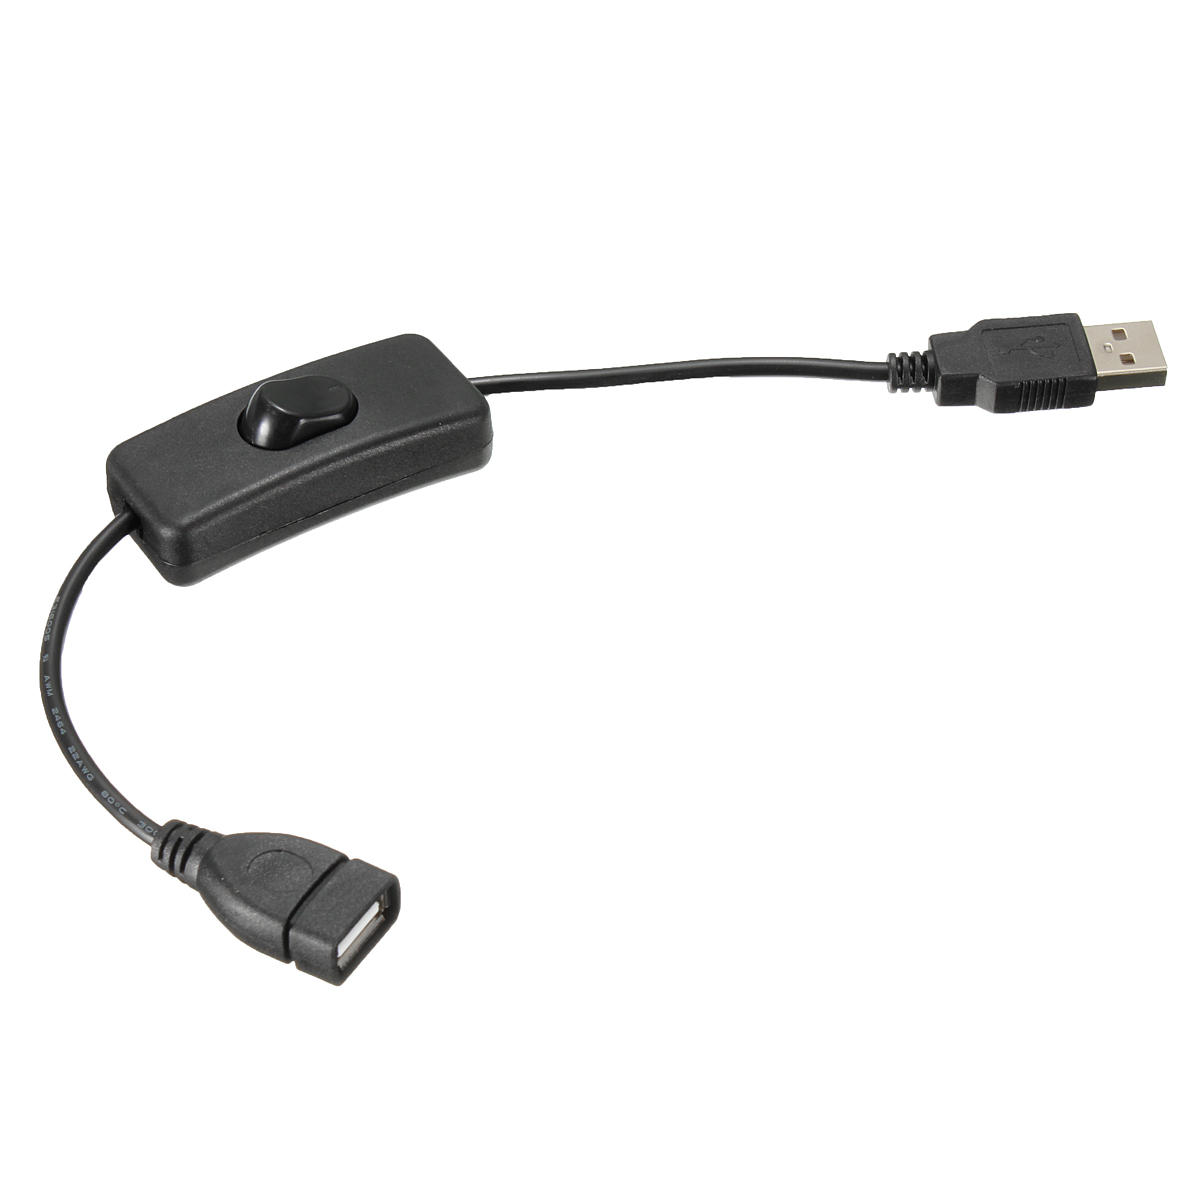 

USB Power Cable With On/Off Switch For Raspberry Pi